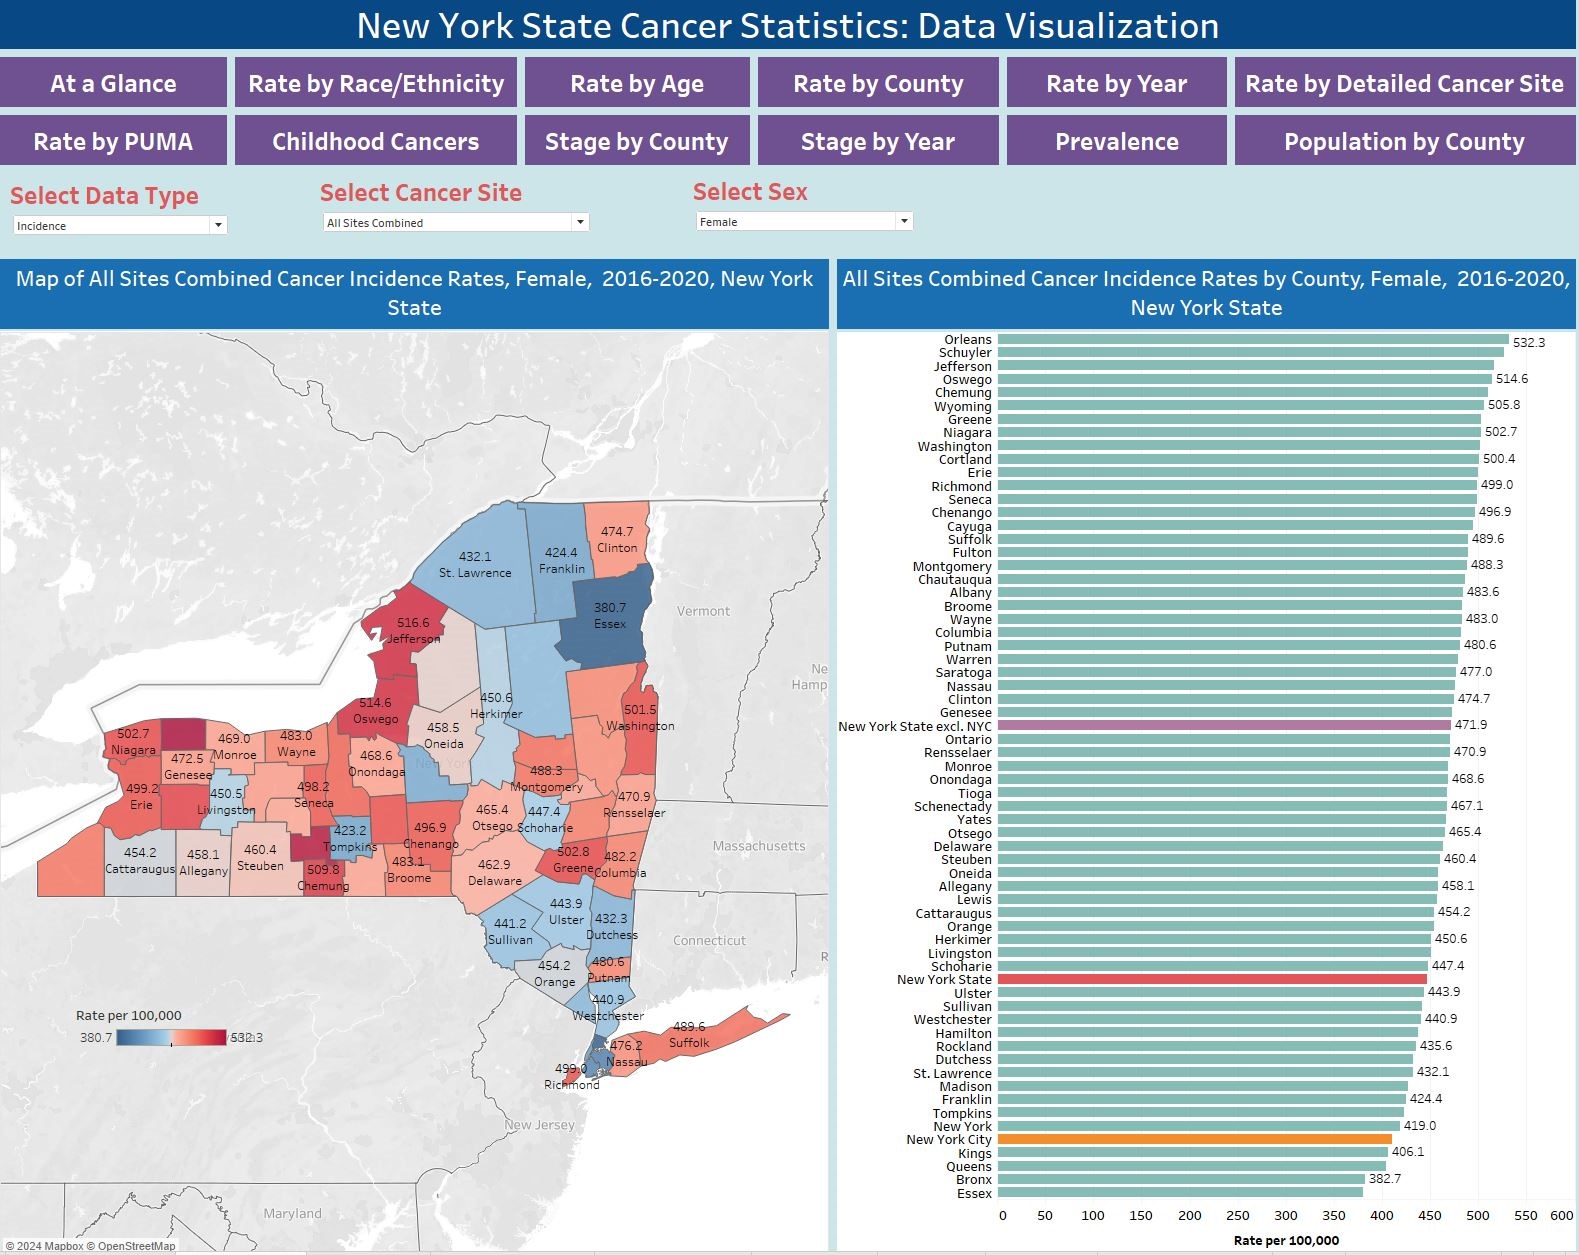 Cancer Incidence and Mortality Rates by County